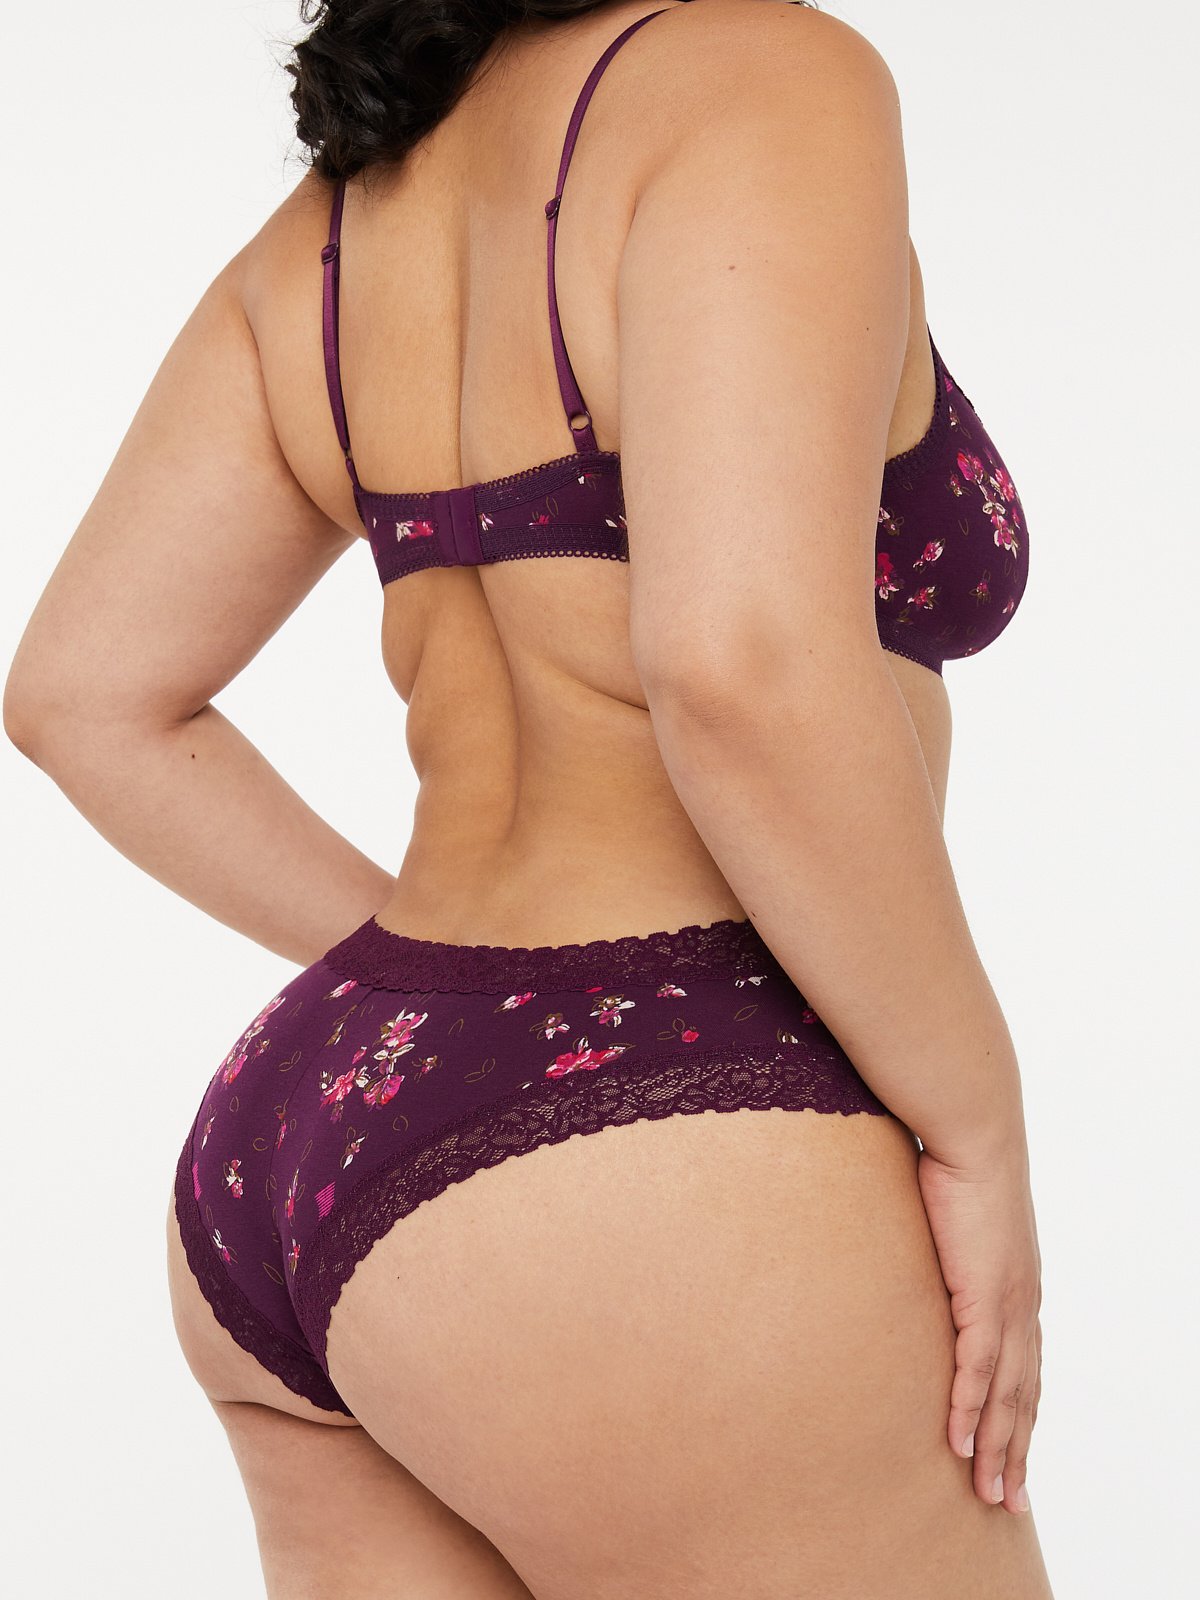 Cotton Essentials Cheeky Panty in Purple